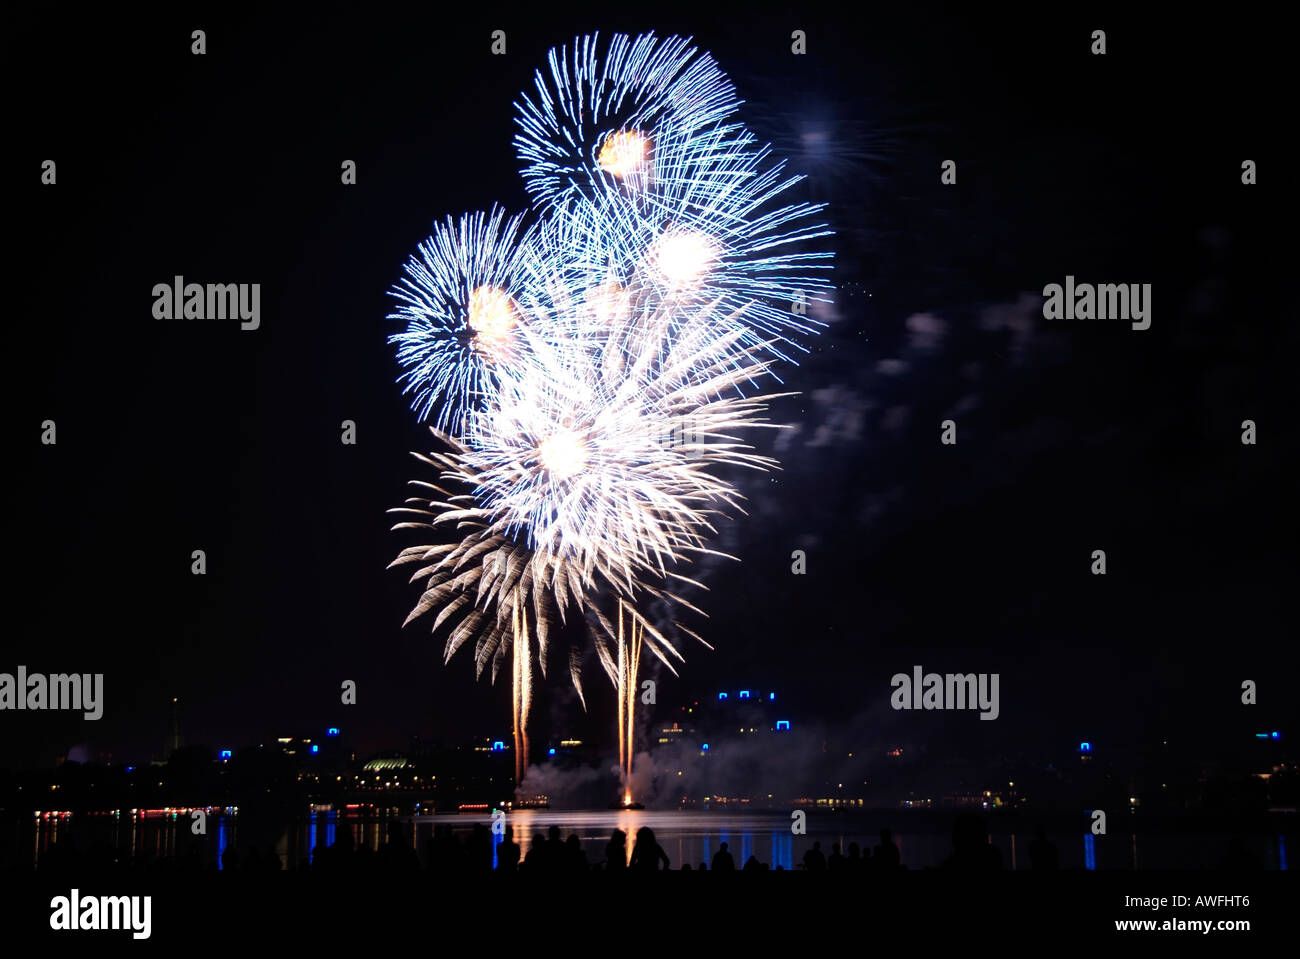 Fireworks at the Außenalster, Hamburg, Germany, Europe, China Time Promotion Stock Photo